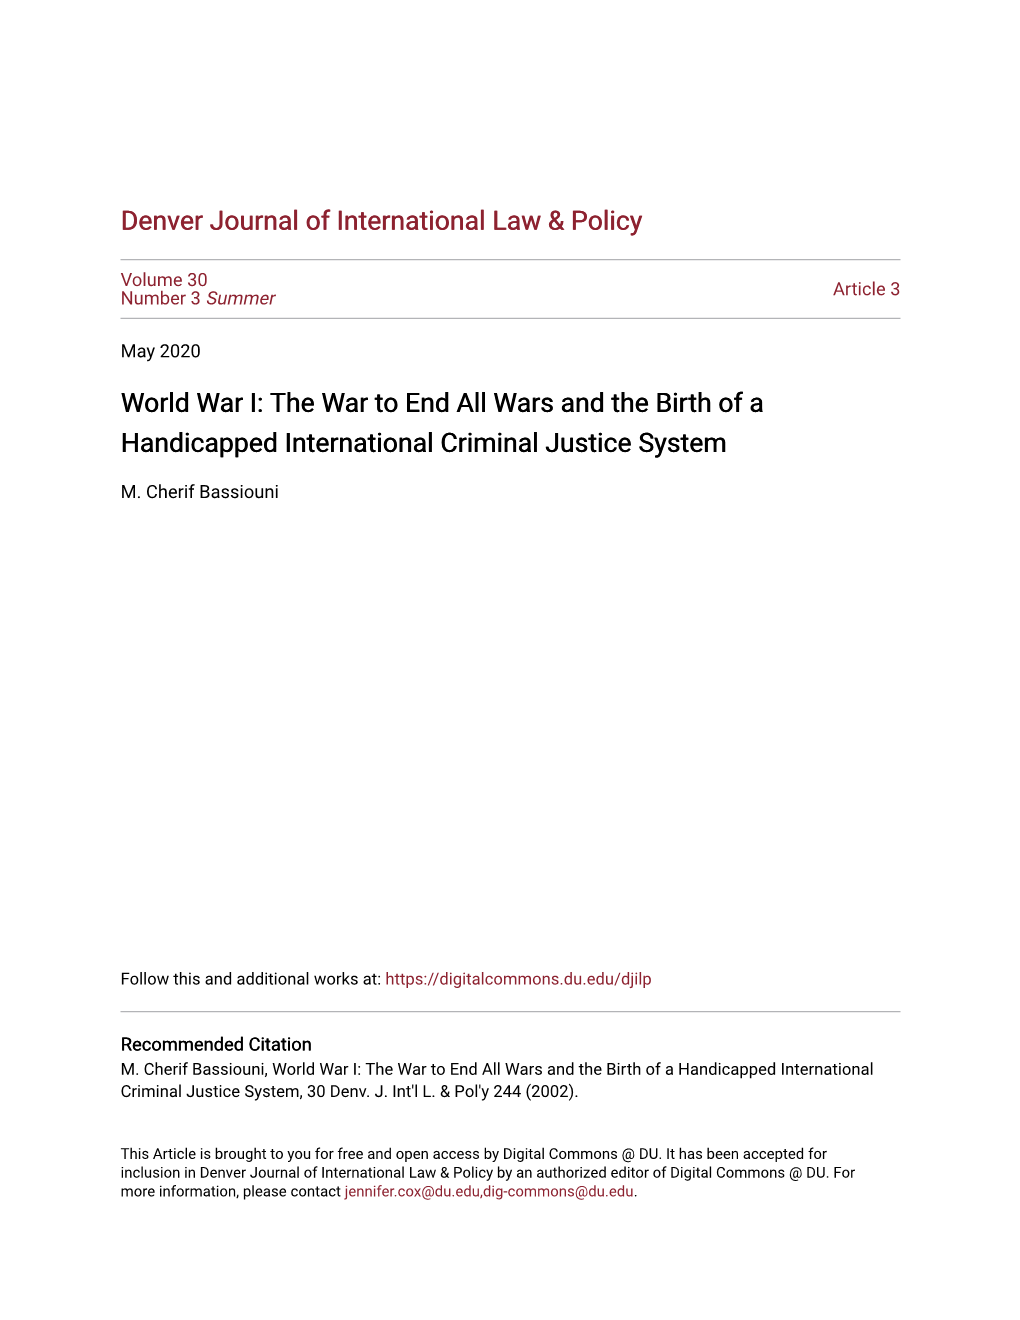 World War I: the War to End All Wars and the Birth of a Handicapped International Criminal Justice System